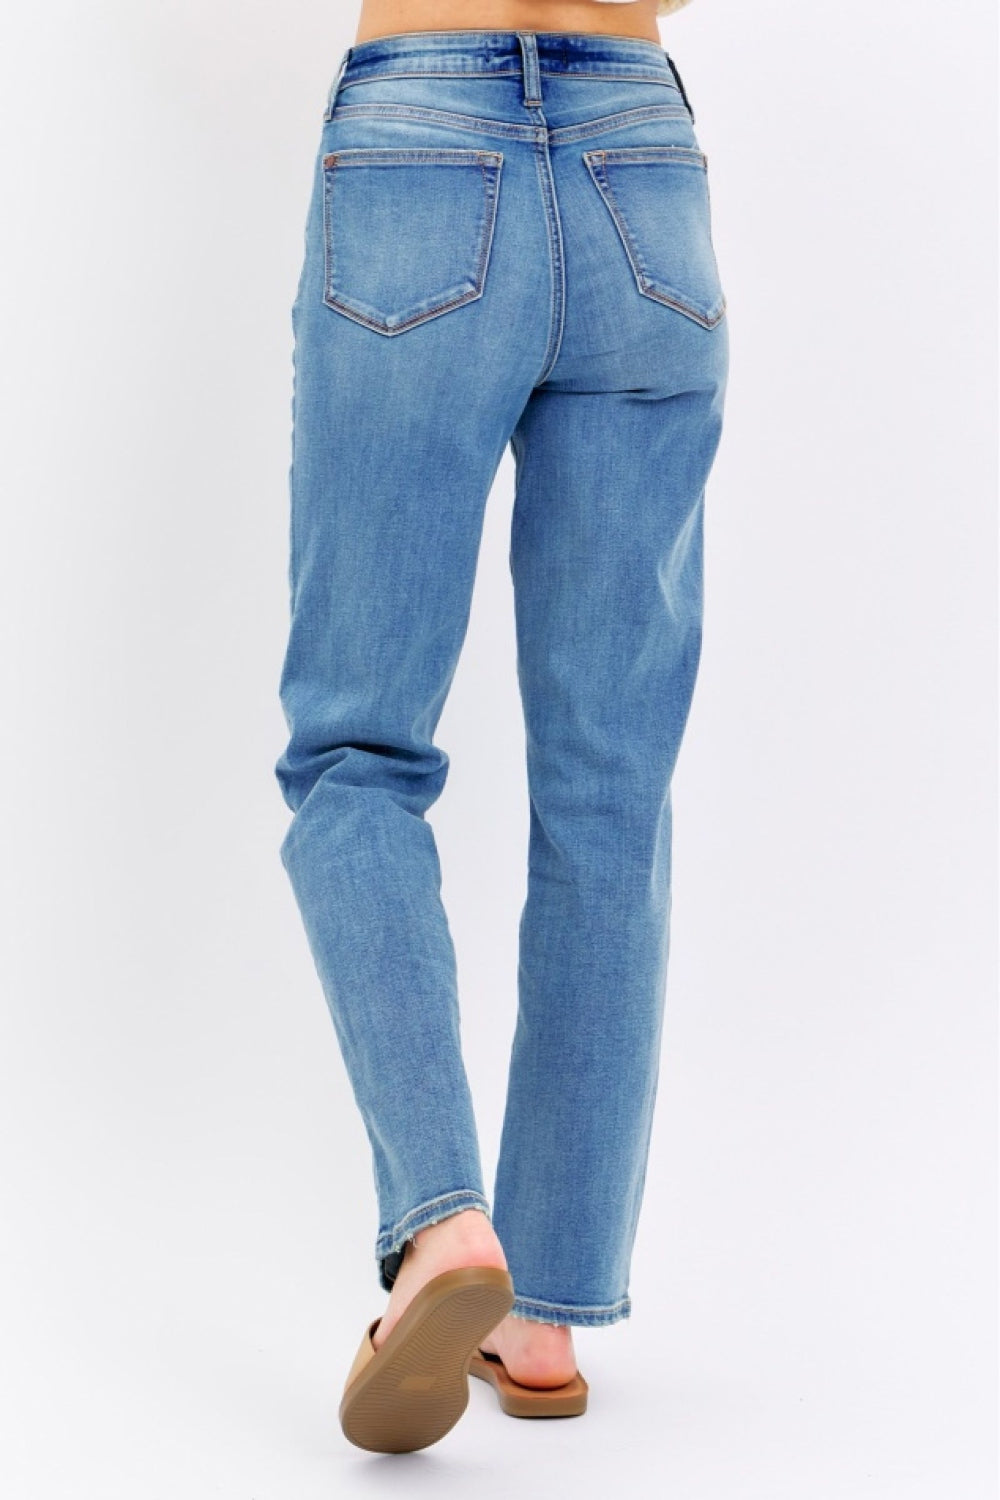 Judy Blue Full Size High Waist Straight Jeans-Denim-Inspired by Justeen-Women's Clothing Boutique in Chicago, Illinois